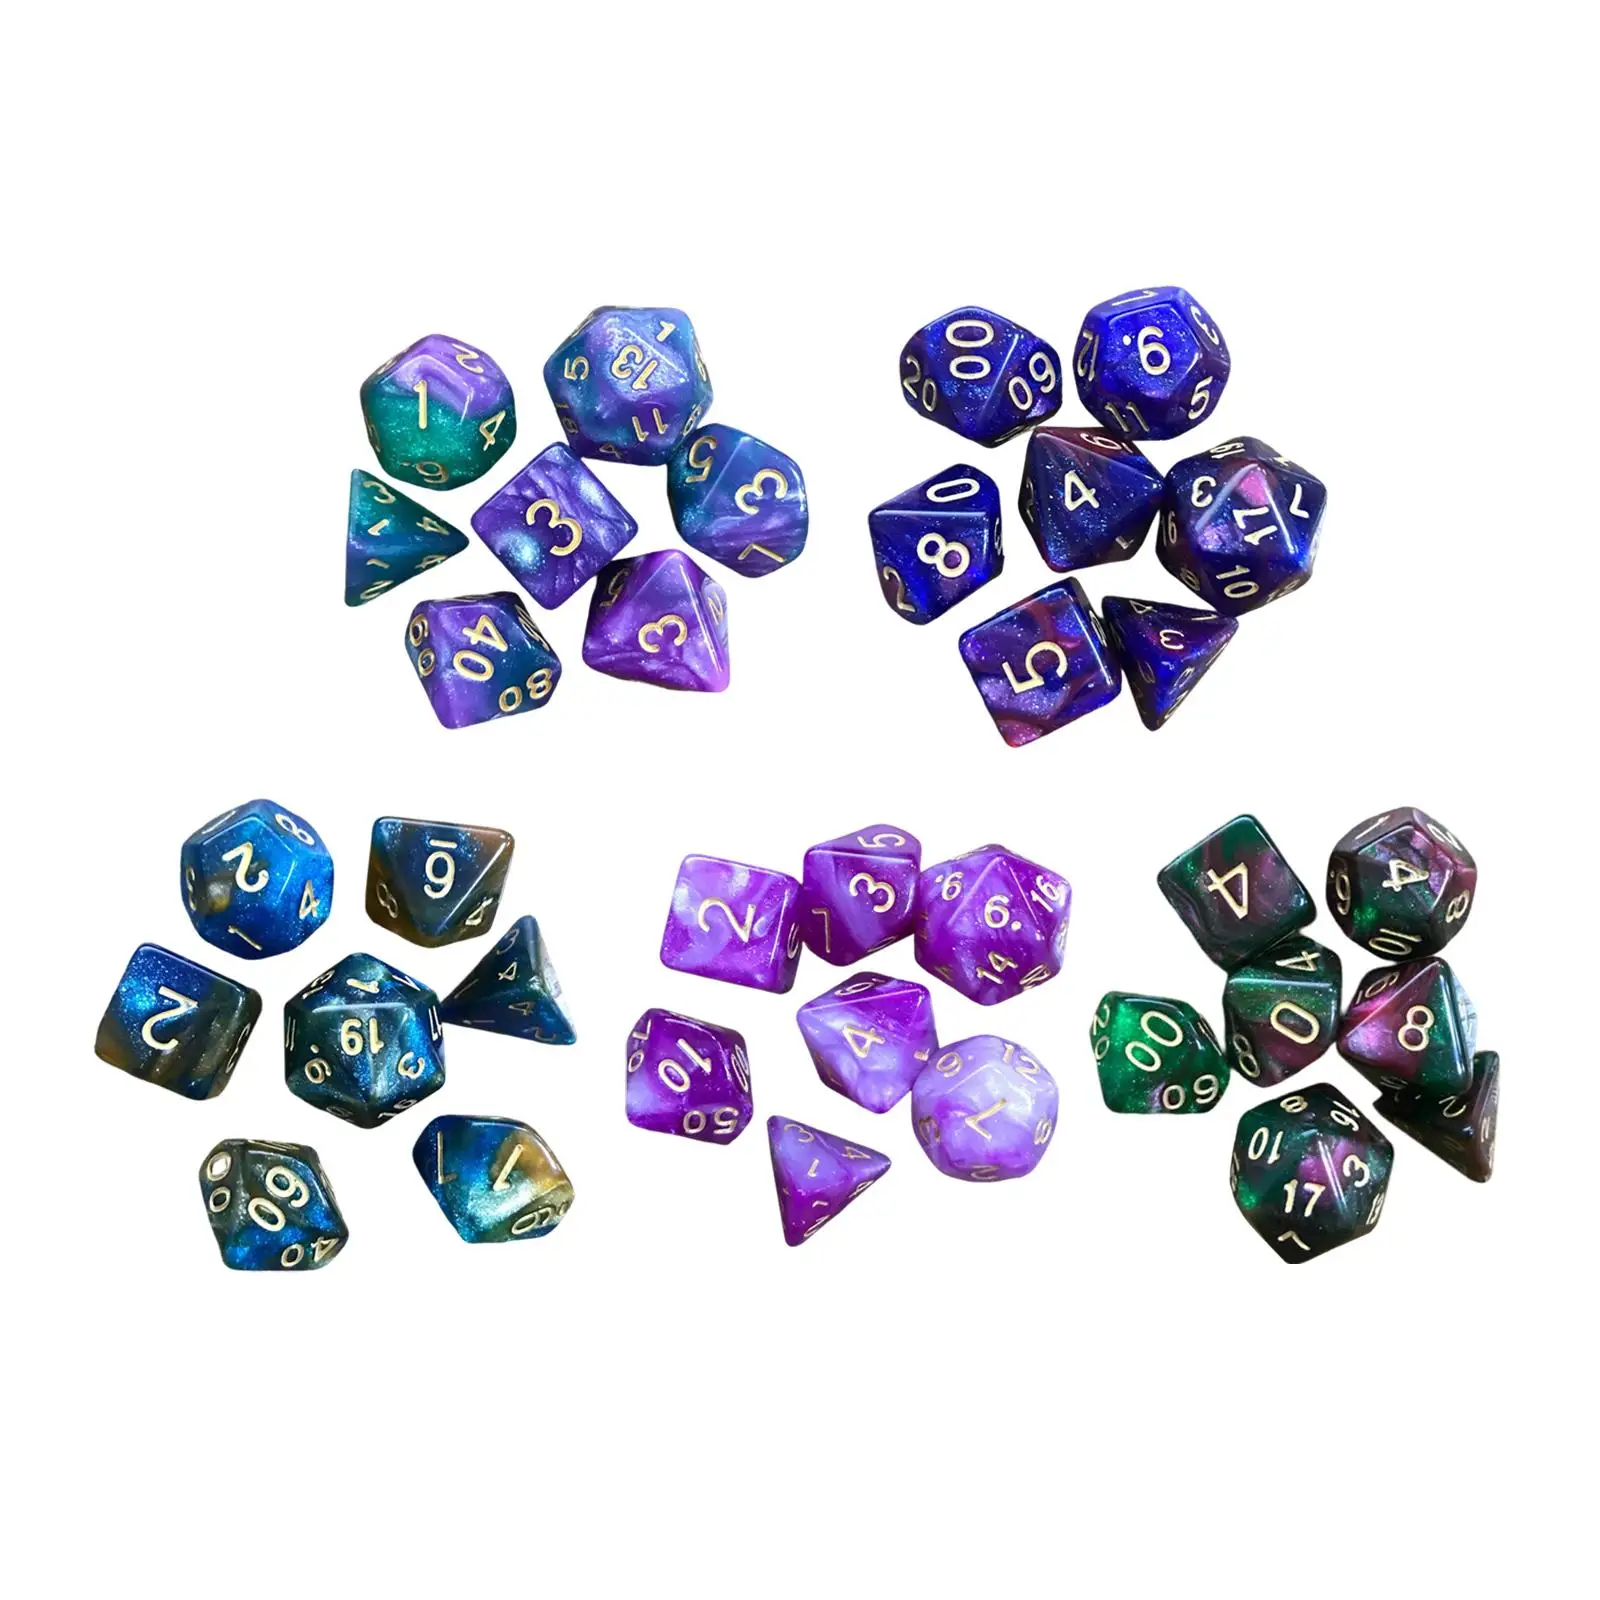 

7 Pieces Polyhedral Dice Tarot Astrology Dice Set Dice Game Astrological Divination Dice for Role Playing Game Family Gathering